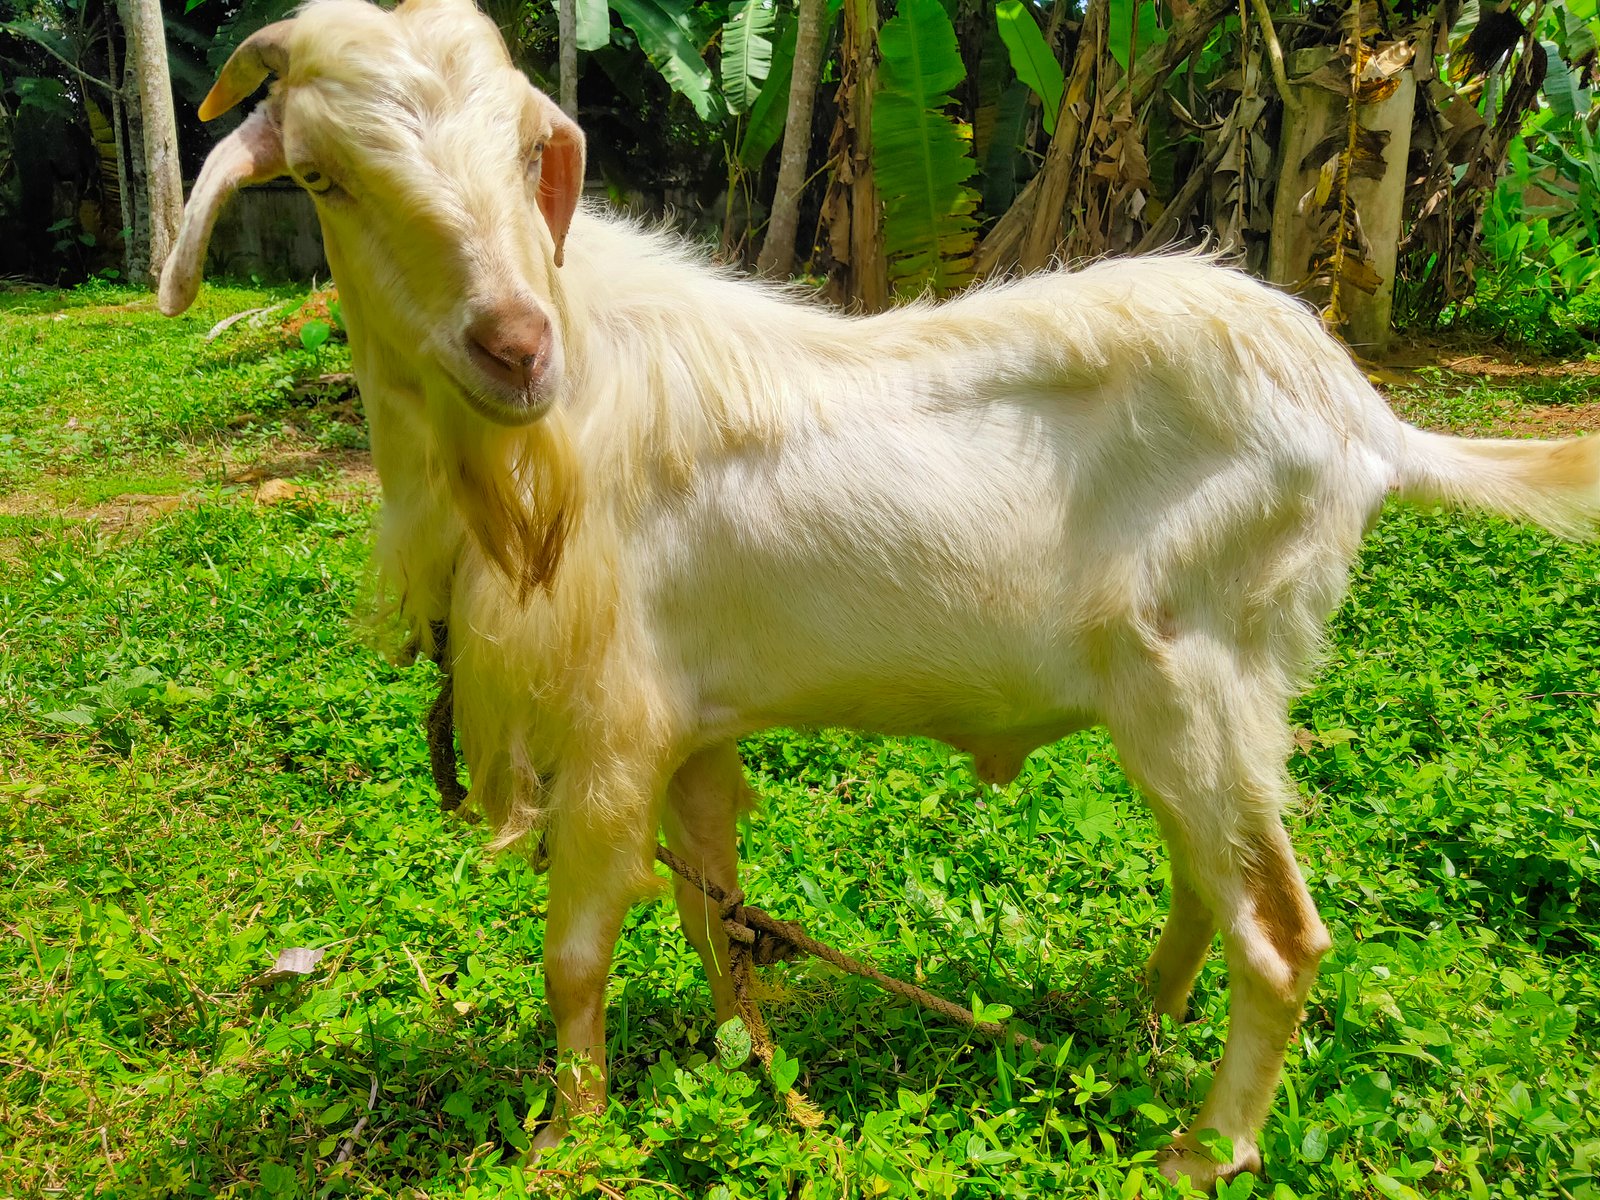 3-mature-or-fully-grown-goats-iid-733880